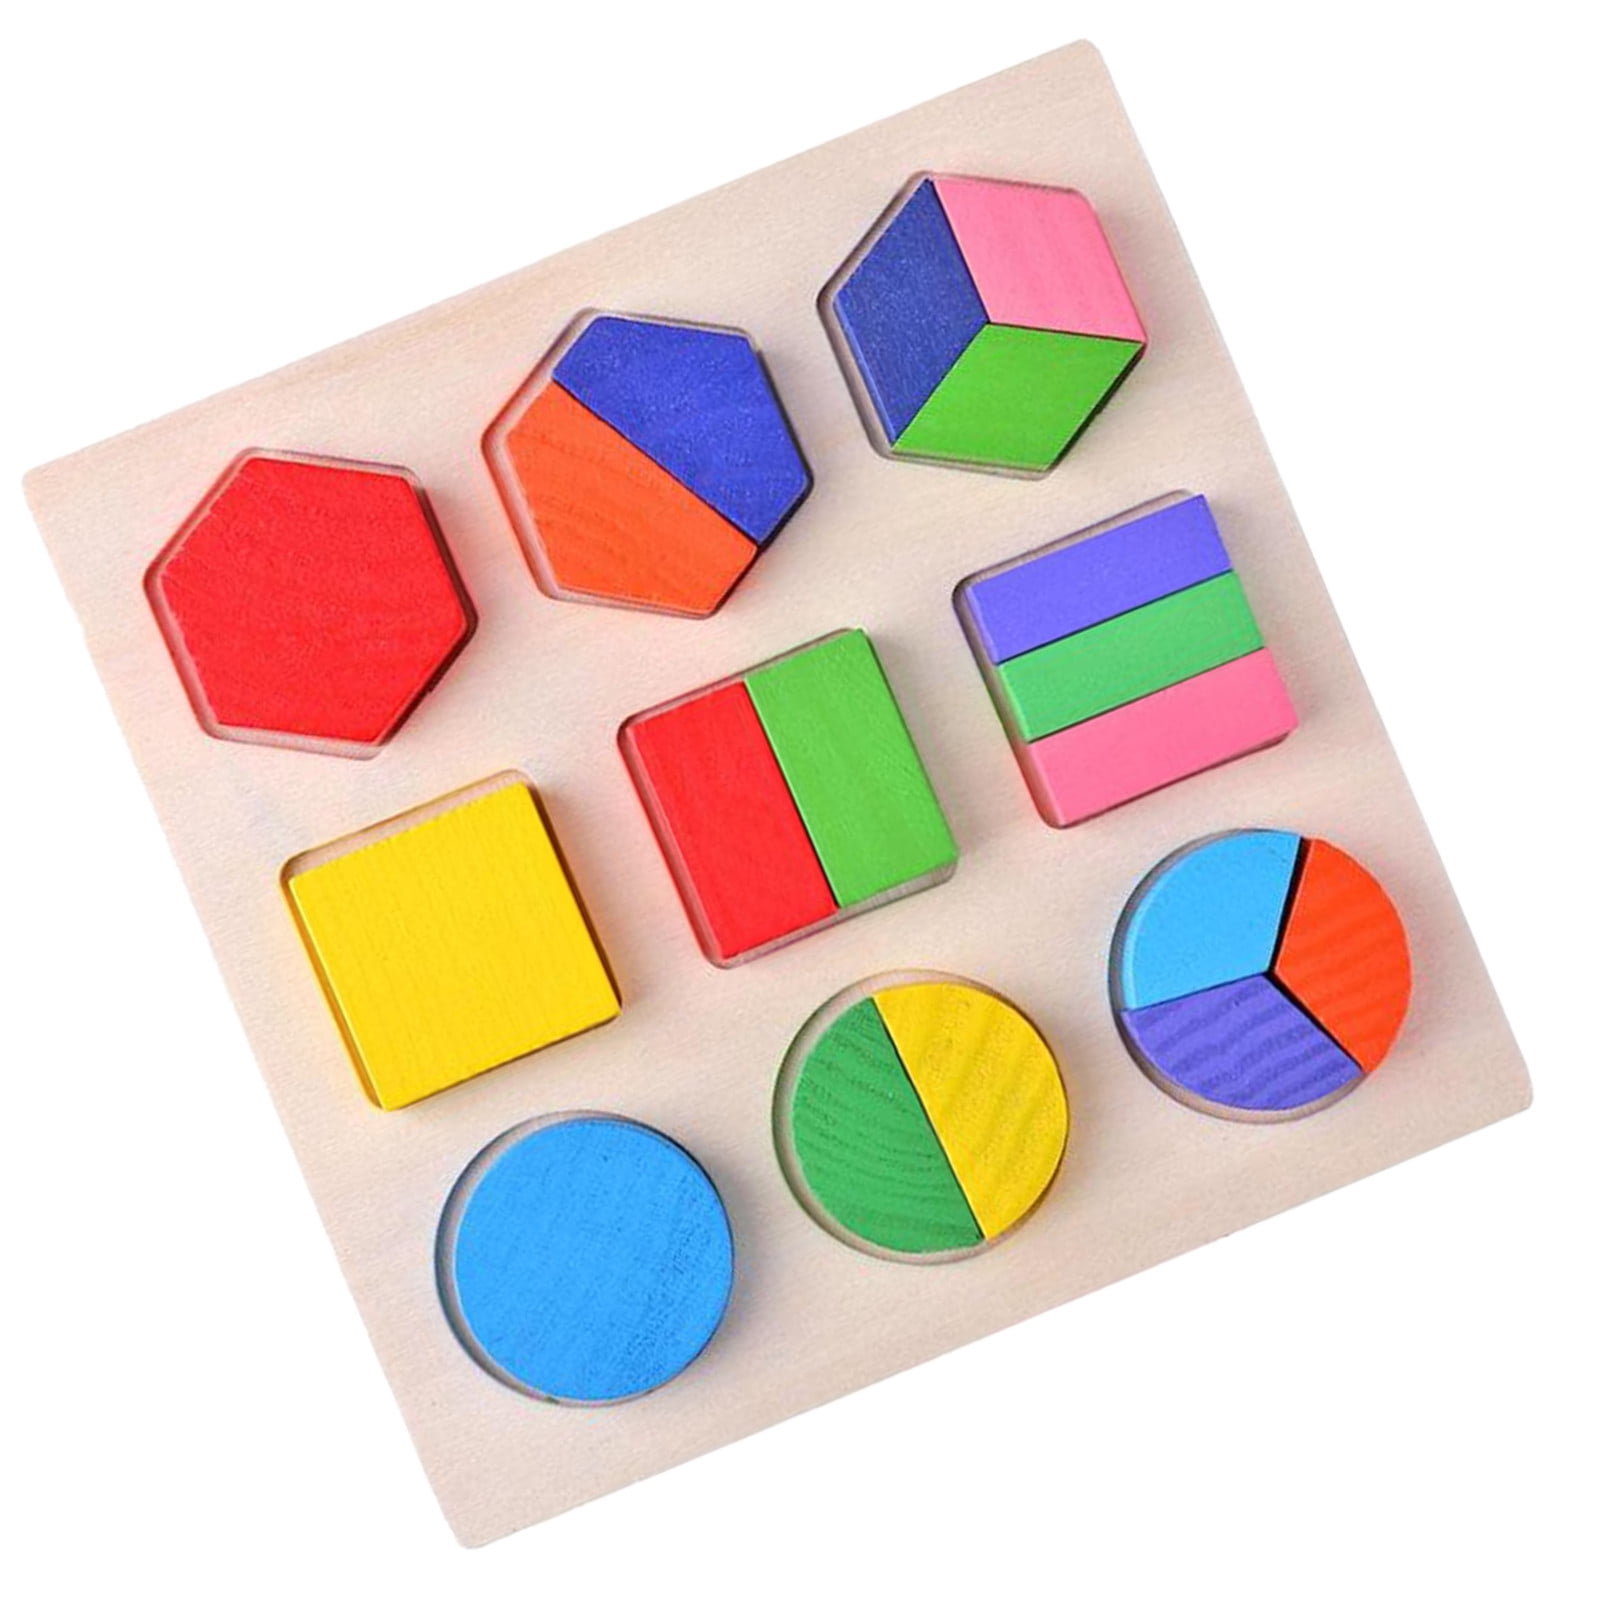 Kids Baby Wooden Geometry Educational Toys Puzzle Montessori Early Learning 